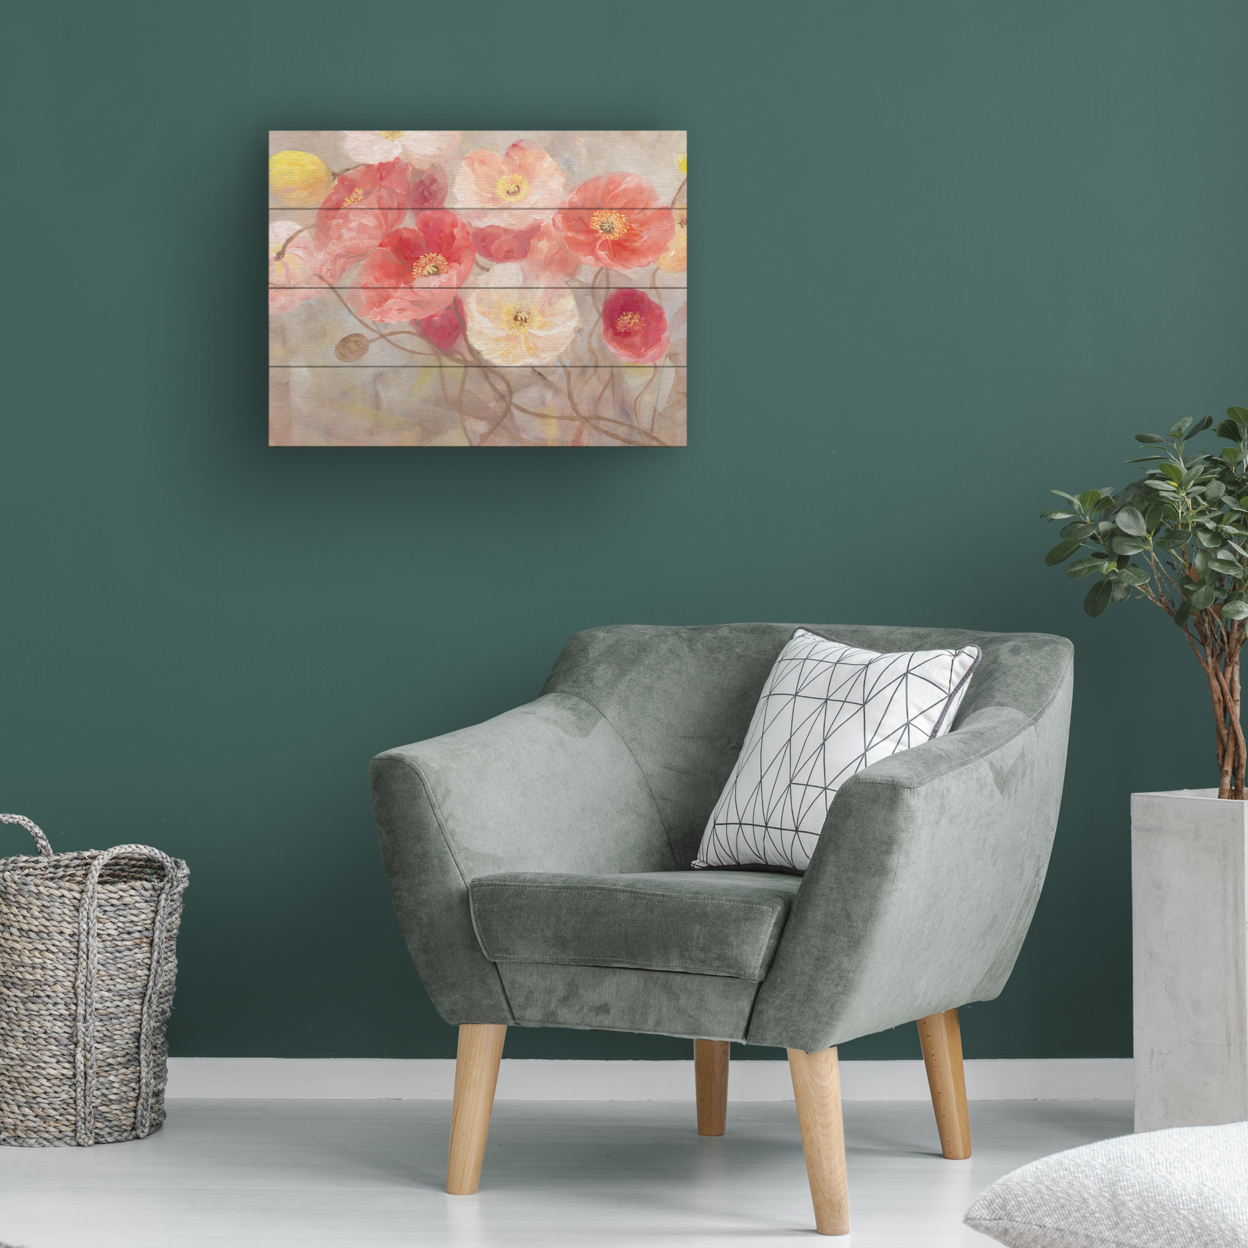 Wall Art 12 X 16 Inches Titled Wild Poppies I Ready To Hang Printed On Wooden Planks